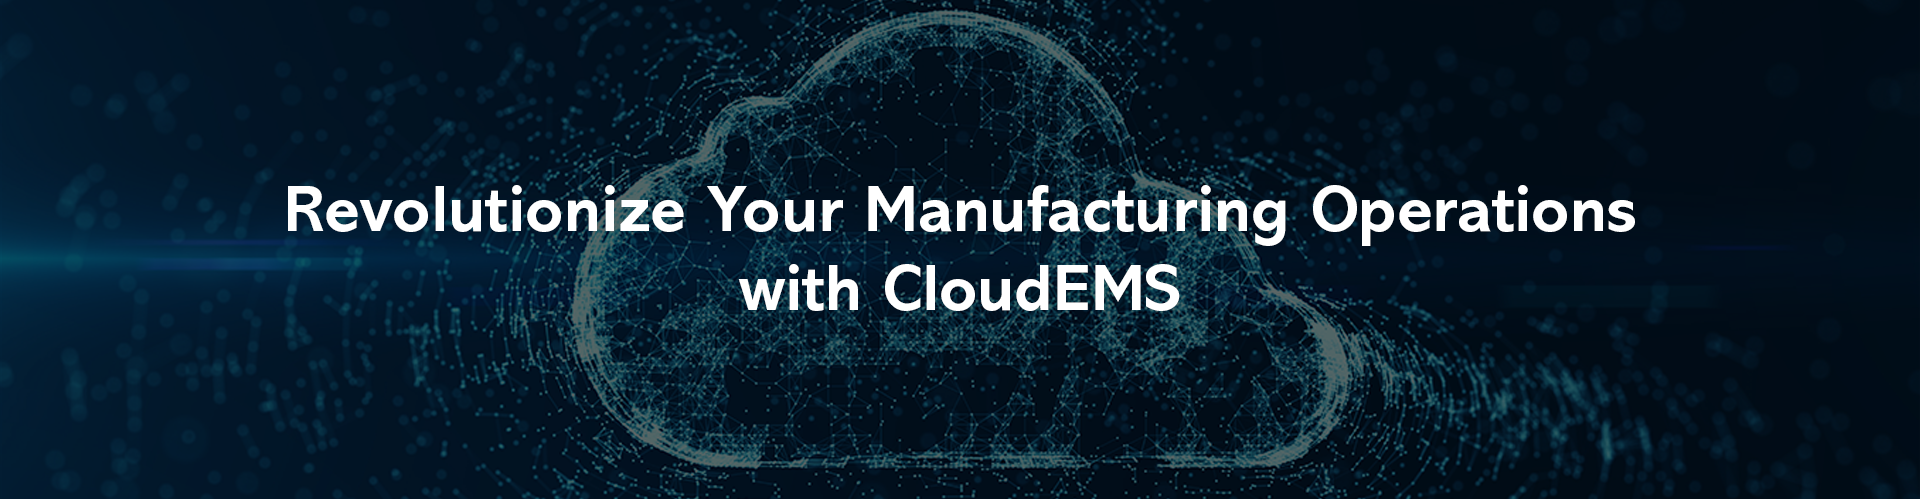 Revolutionize Your Manufacturing Operations with Grantek’s CloudEMS